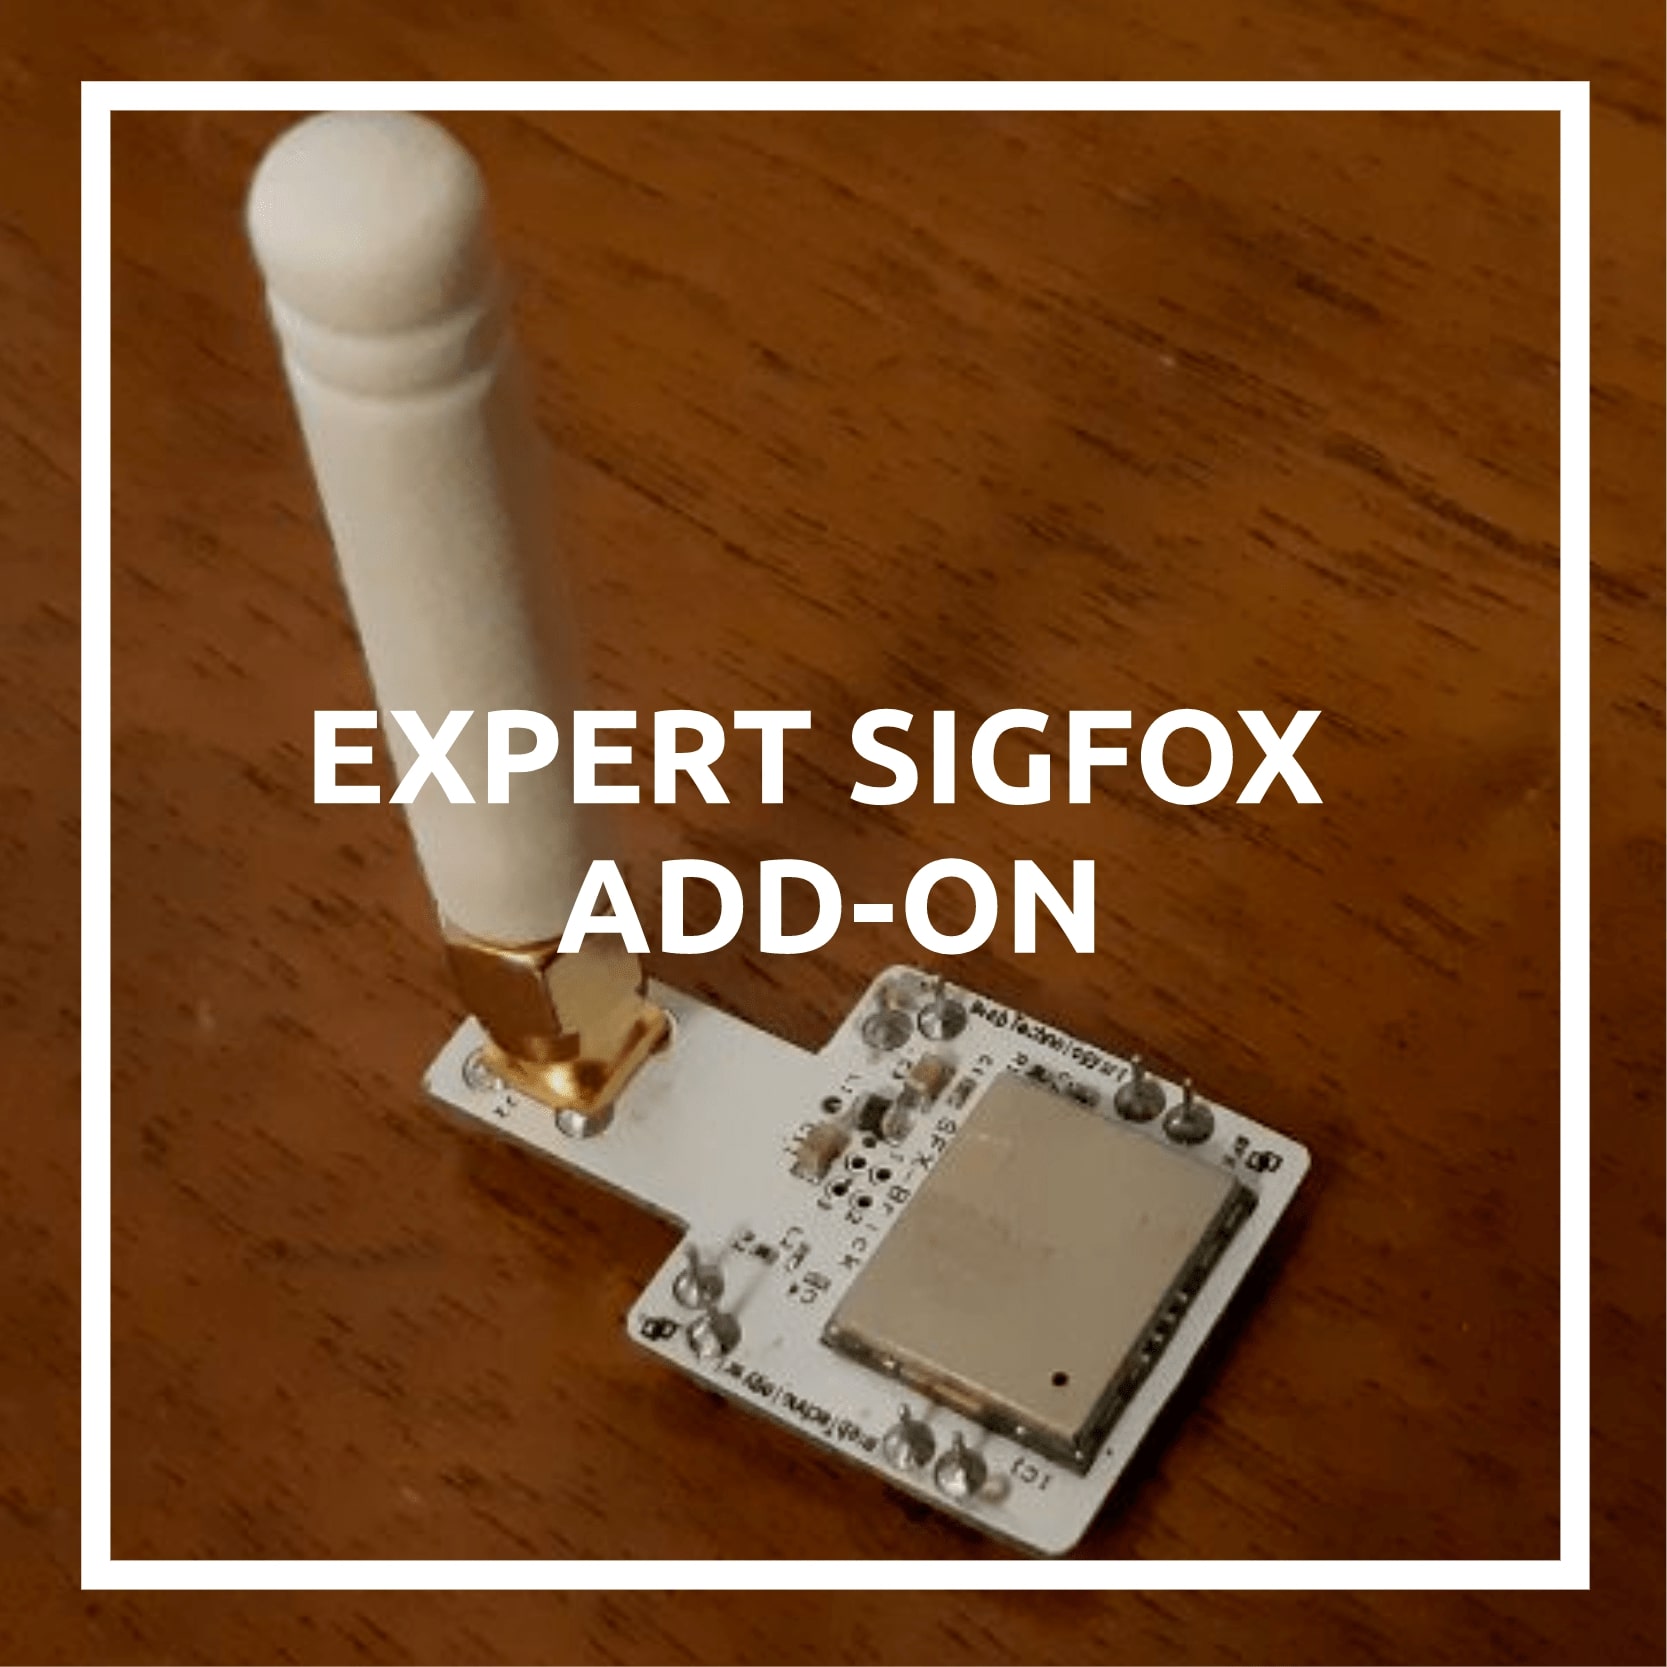 The Expert Sigfox Add-on includes 1 naked SFX and monopole antenna and can  be added to any other  Blebricks kit.